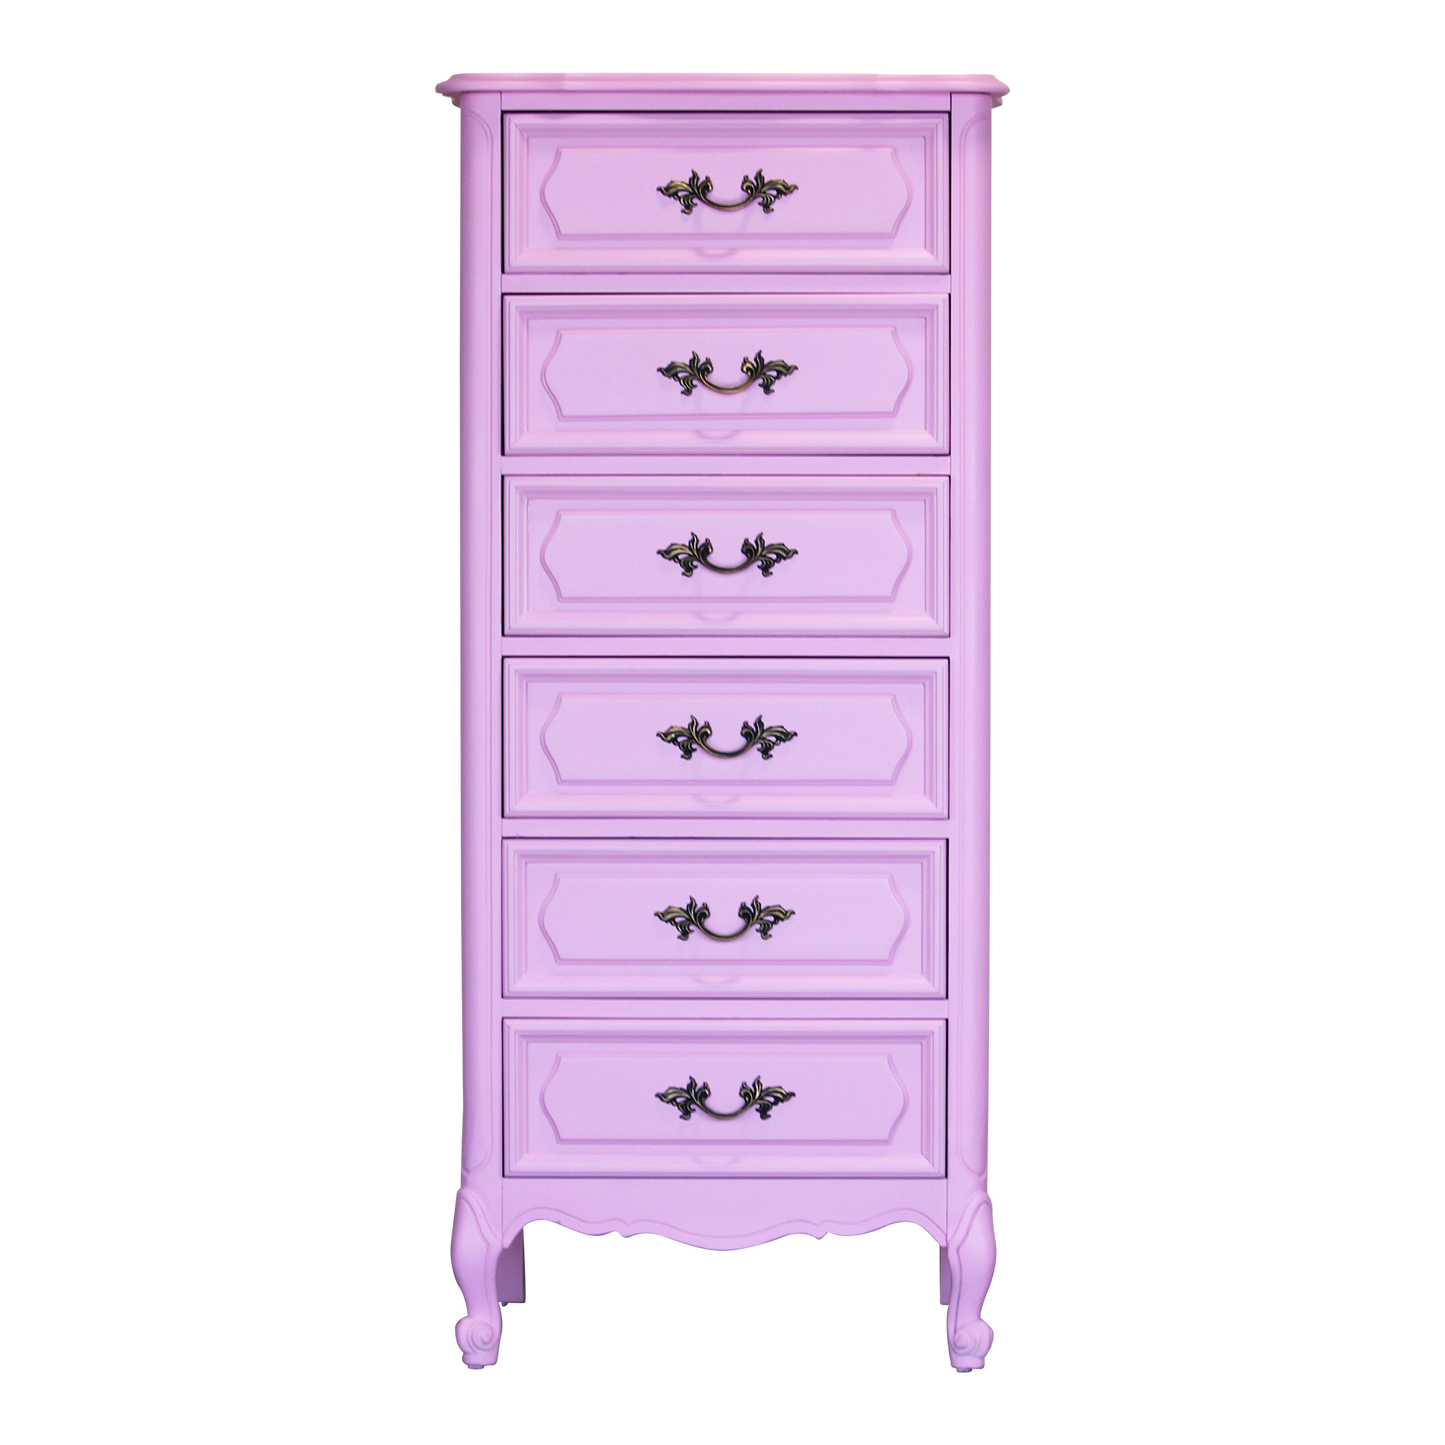 Vintage French style lingerie chest of six drawers.  This chest is nicely painted in cotton candy pink with satin finish.  Dimensions; 24" Width x 19" Depth x 55" Height. 